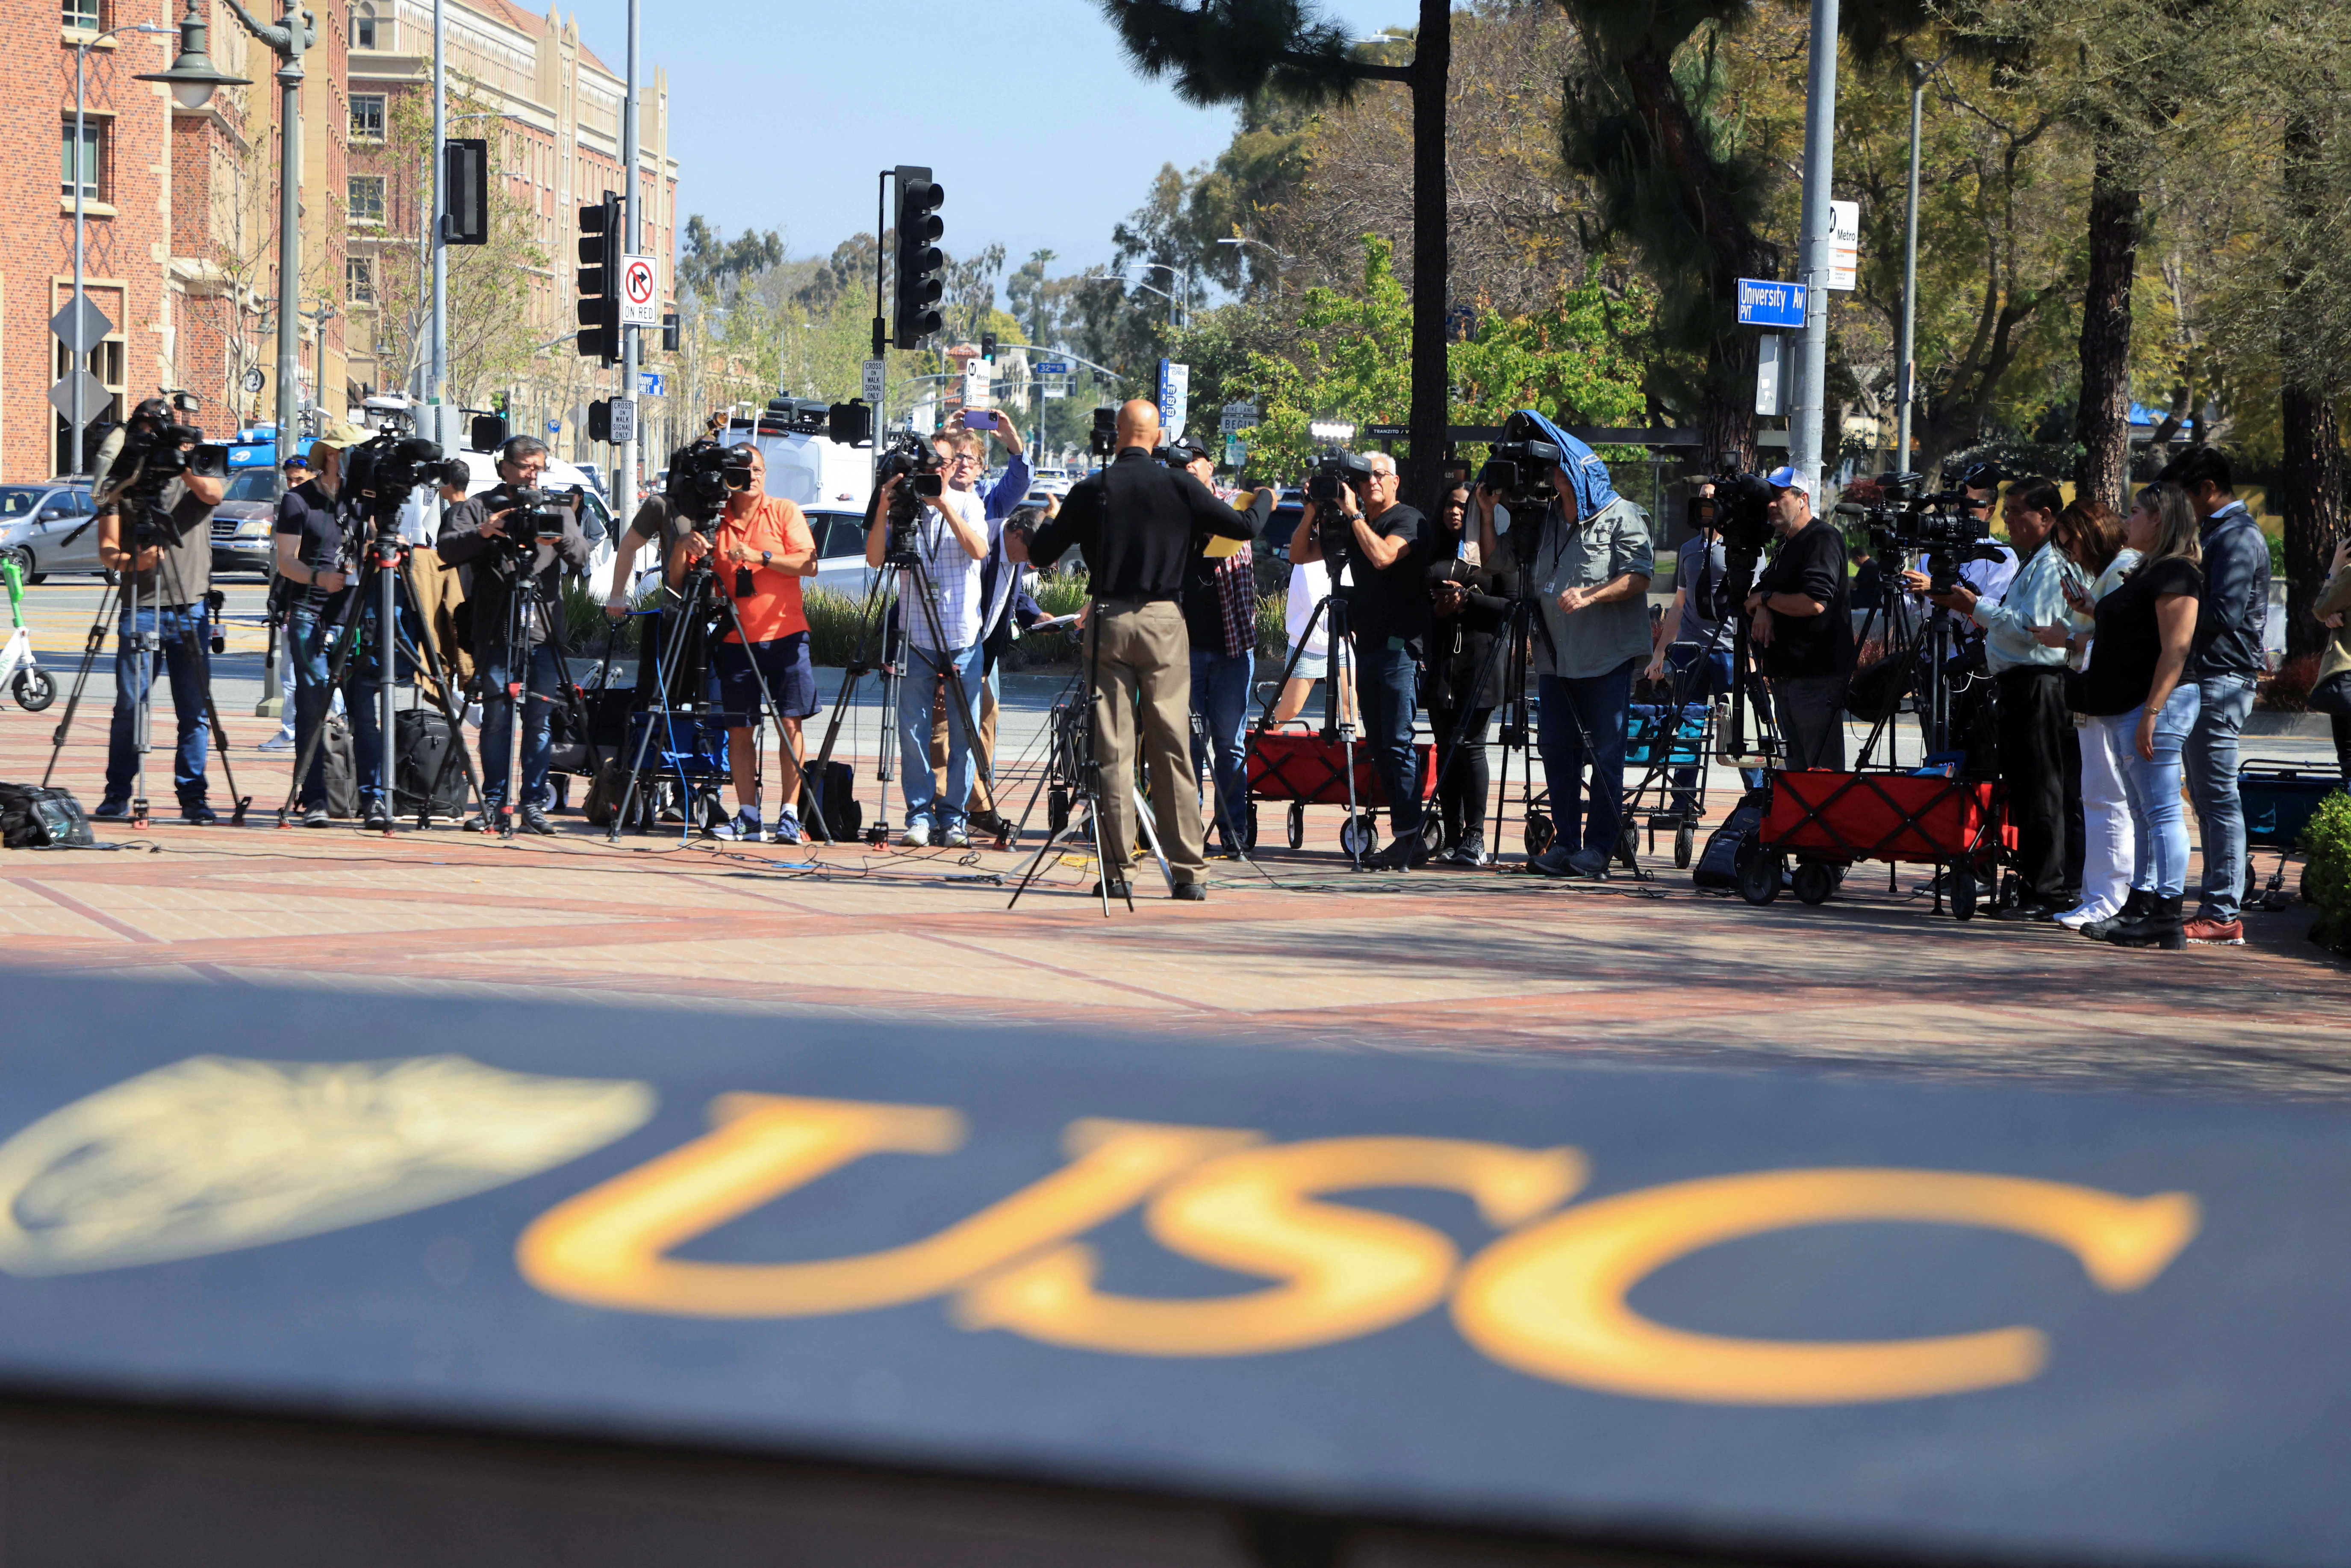 Students build a protest encampment in support of Palestinians at USC